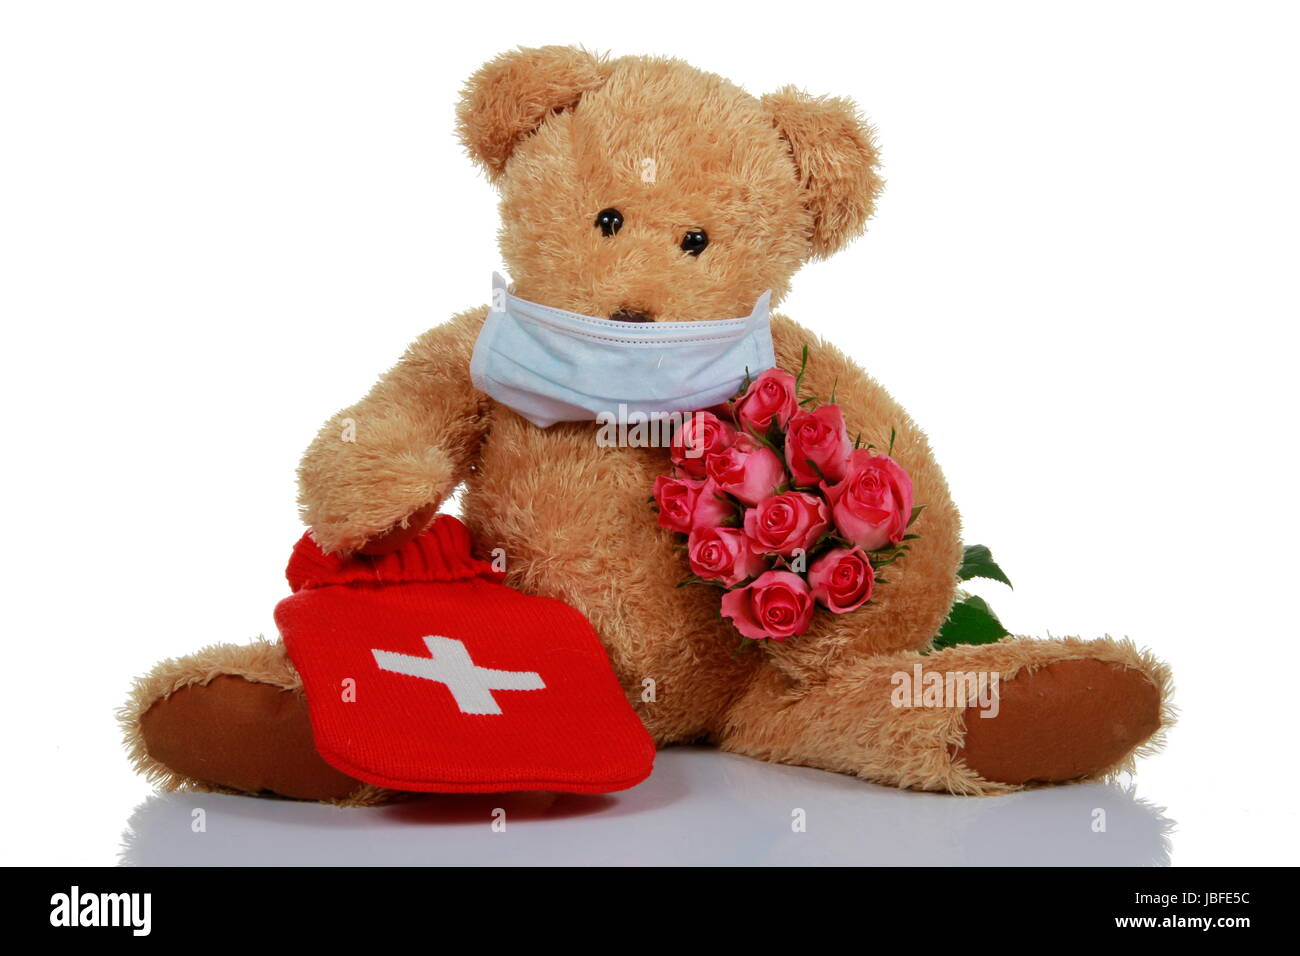 teddy bear with hot water bottle and roses Stock Photo